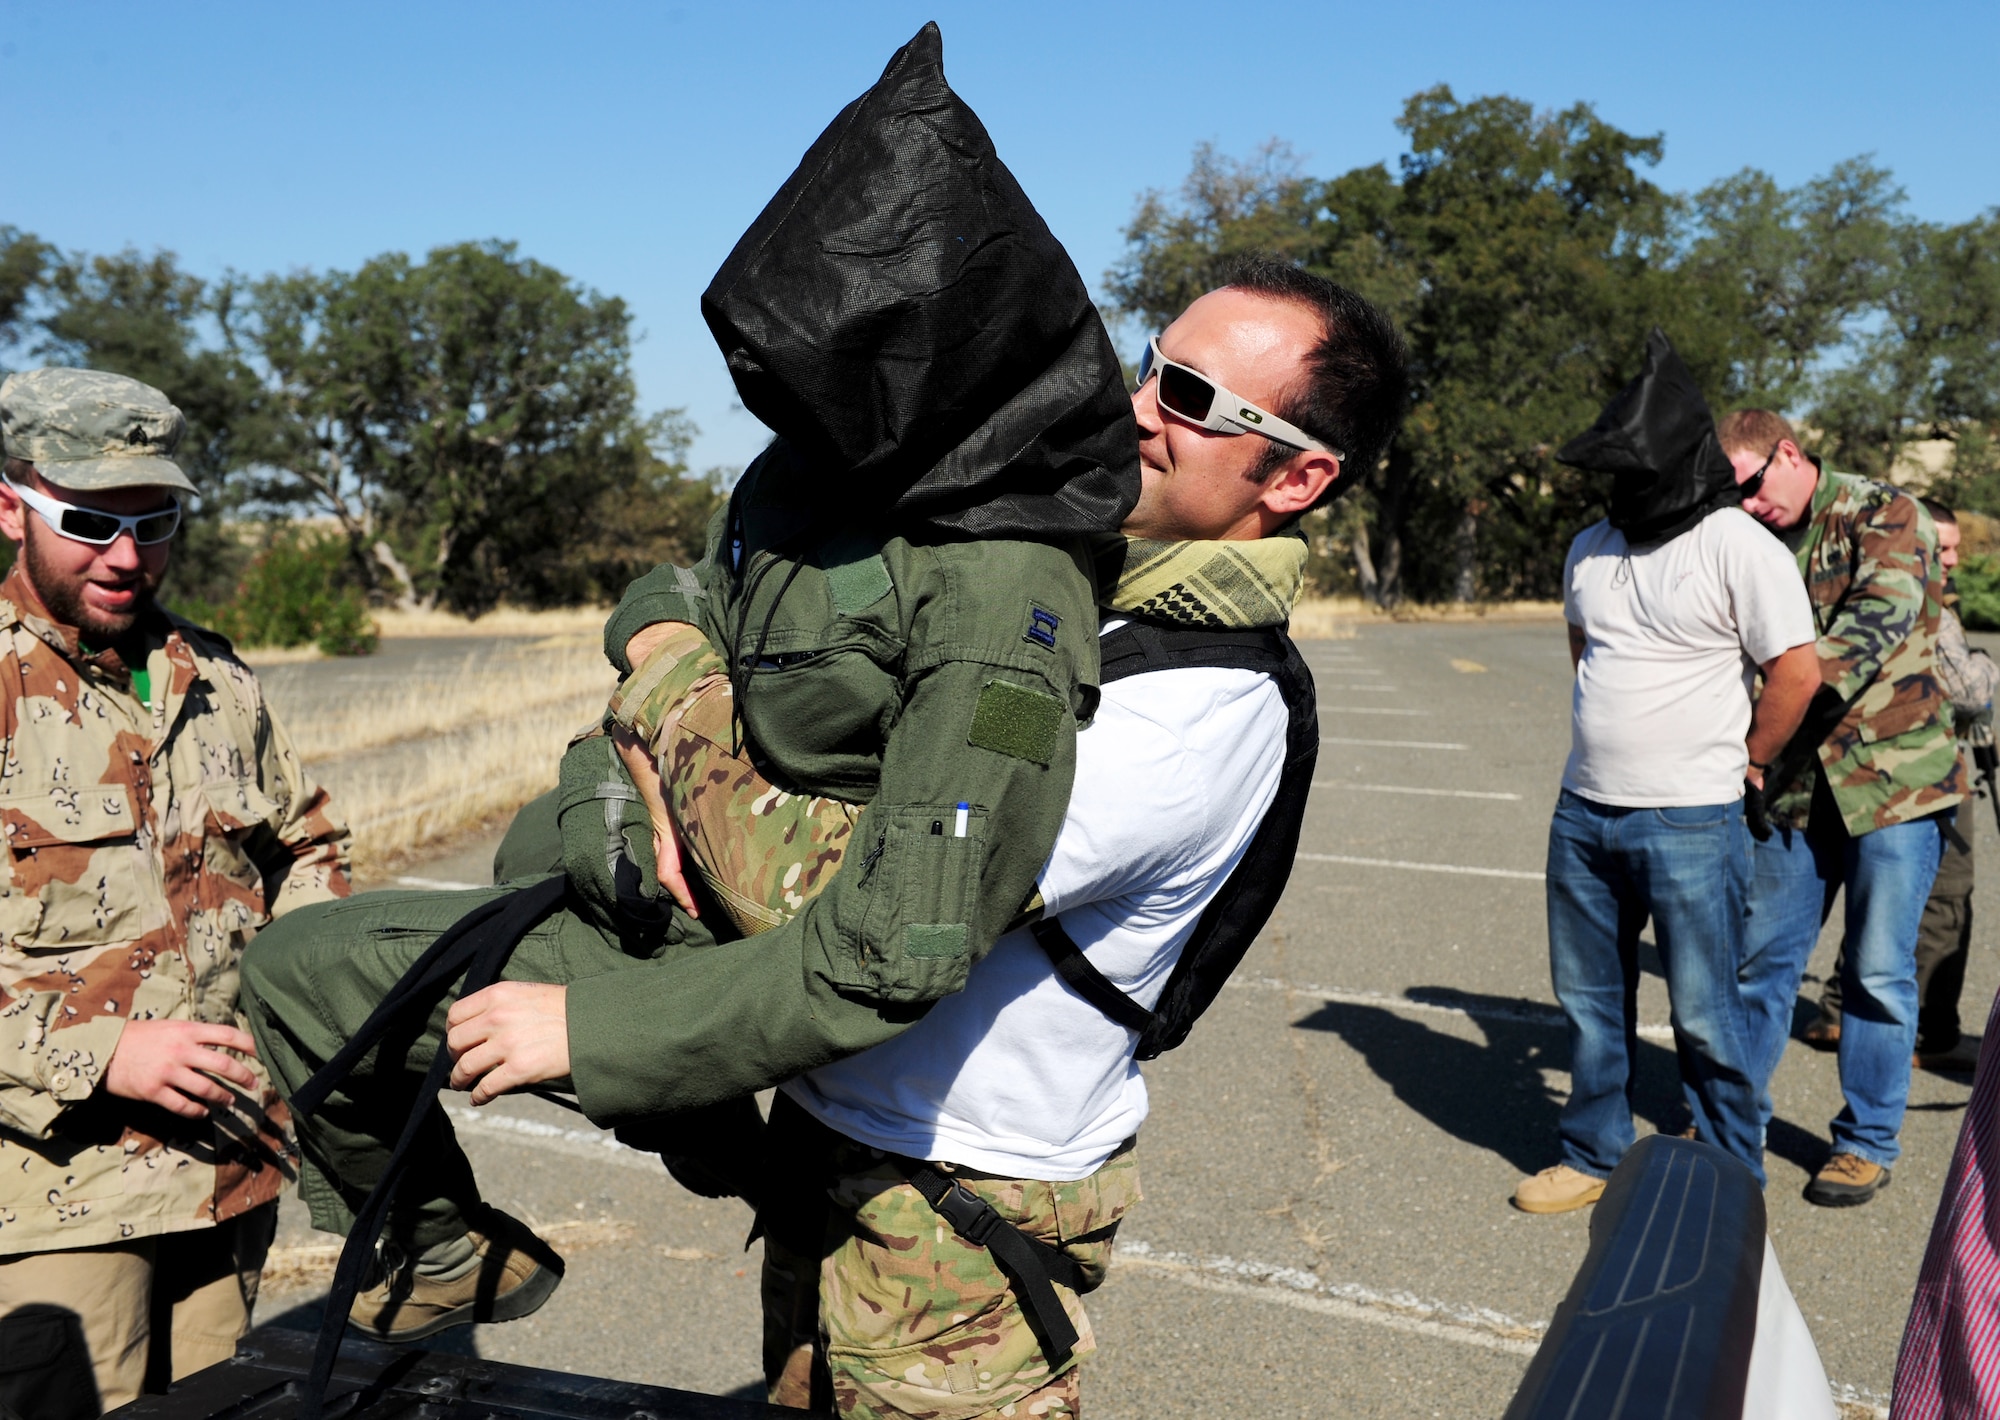 A captured pilot is loaded into a vehicle during a pilot-rescue exercise at Beale Air Force Base, Calif., Oct. 9, 2013. Air Force contractors acted as opposition forces throughout the exercise. (U.S. Air Force photo by Airman 1st Class Bobby Cummings/Released)